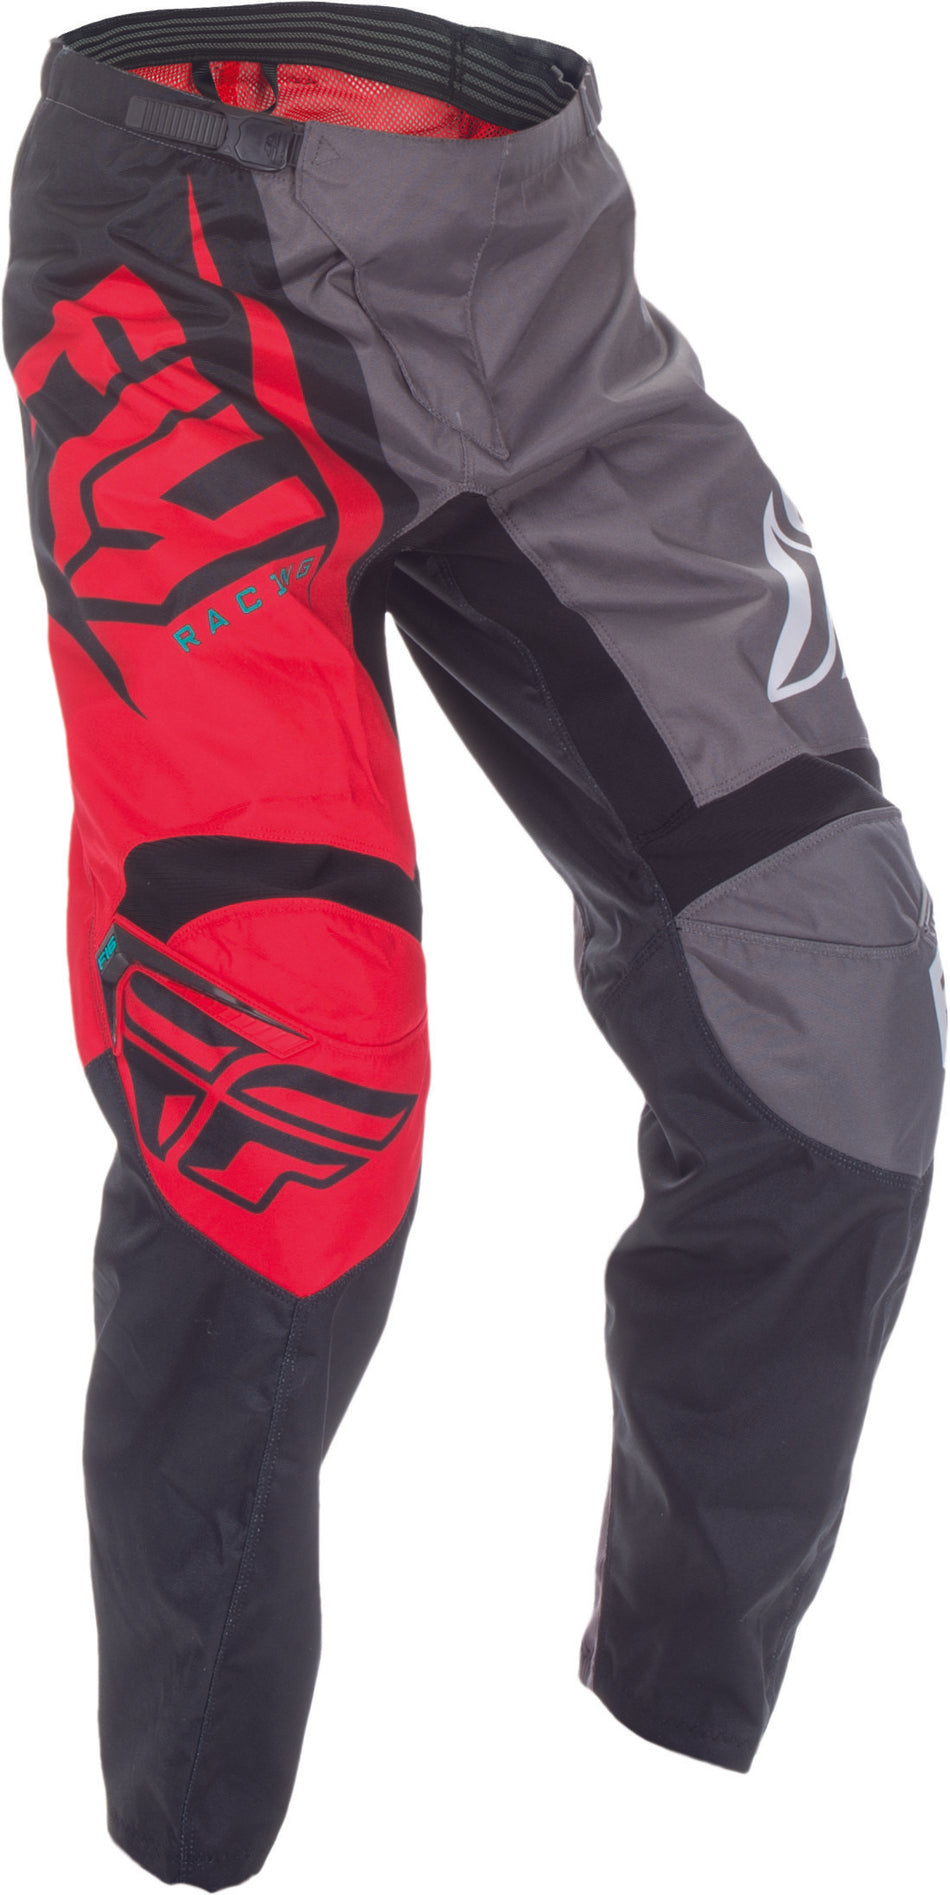 FLY RACING F-16 Pant Red/Black/Grey Sz 38 370-93238